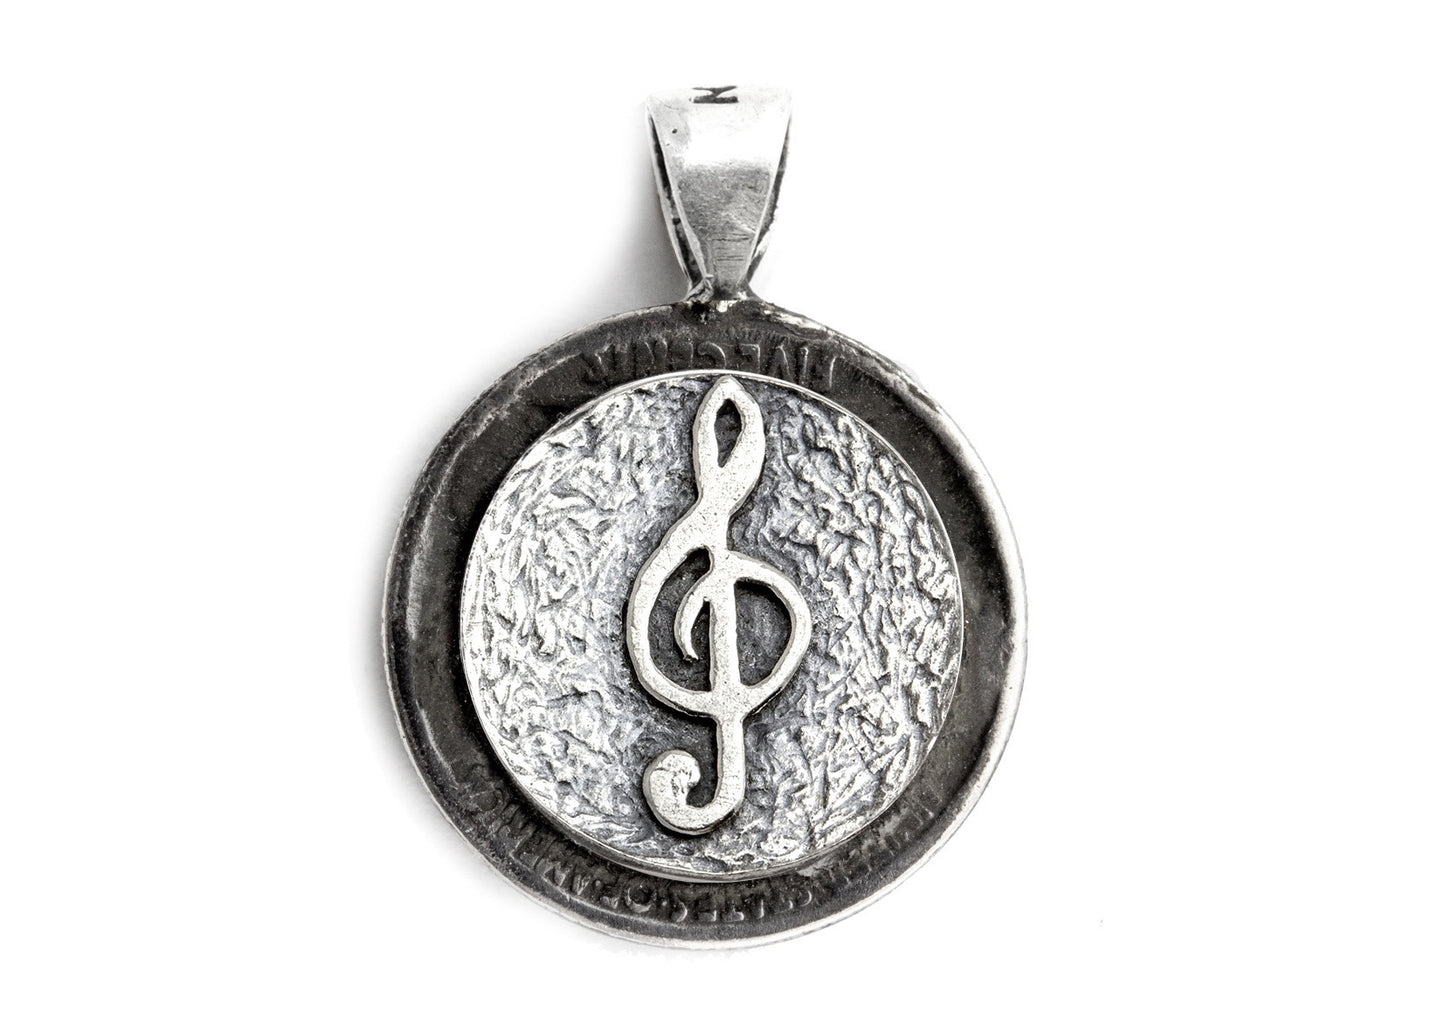 Treble Clef coin Treble Clef medallion and the Buffalo Nickel coin of USA